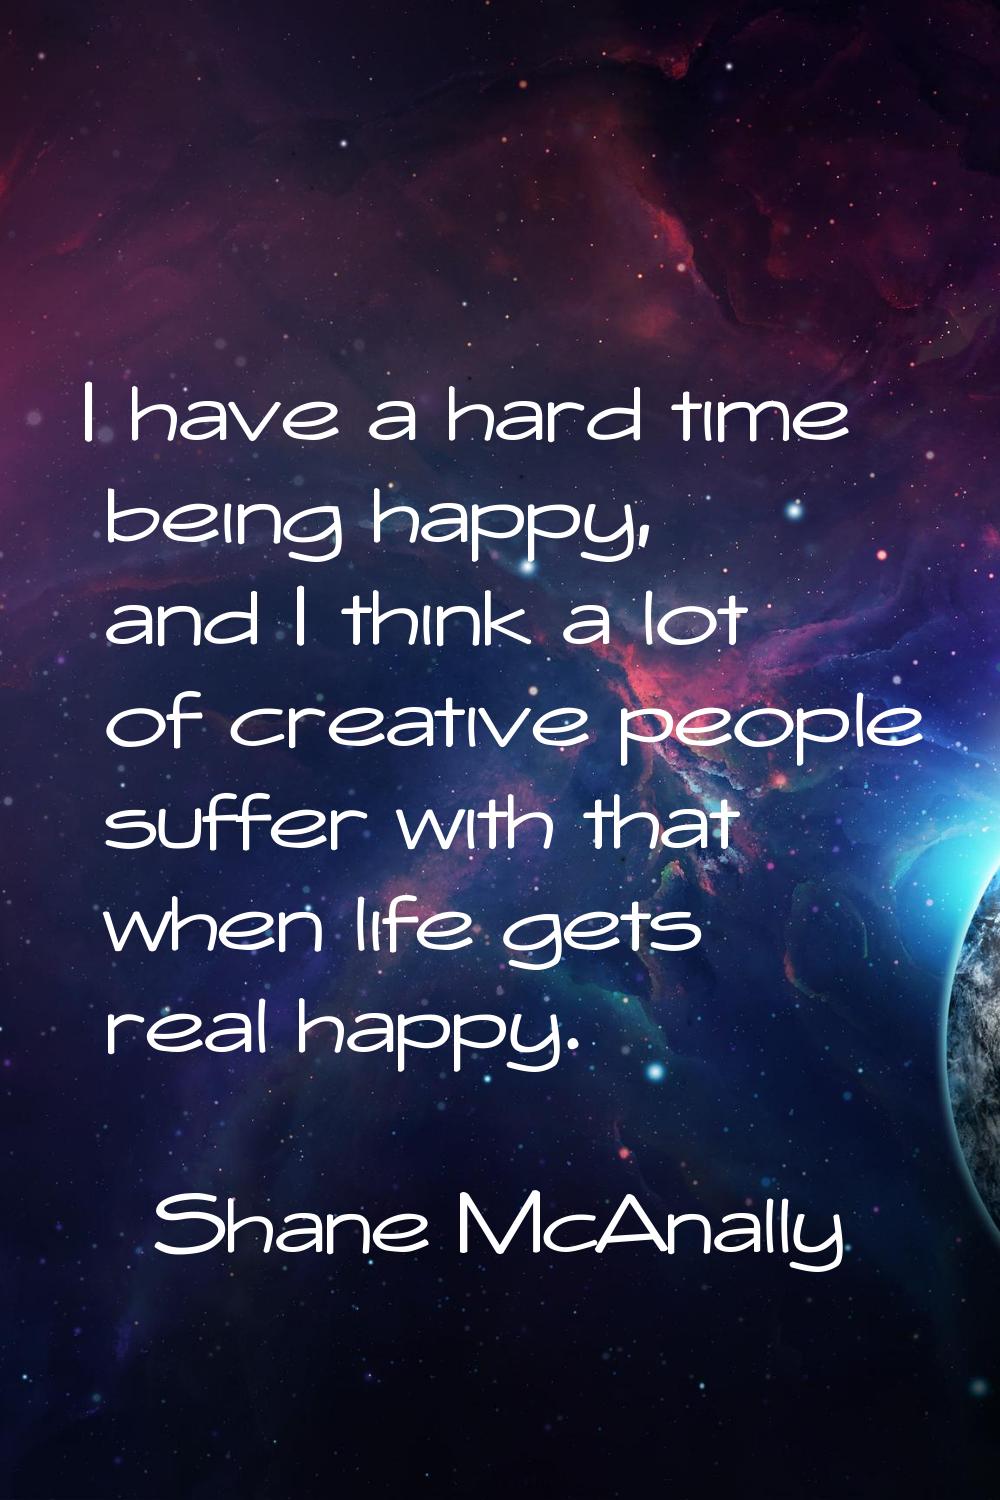 I have a hard time being happy, and I think a lot of creative people suffer with that when life get